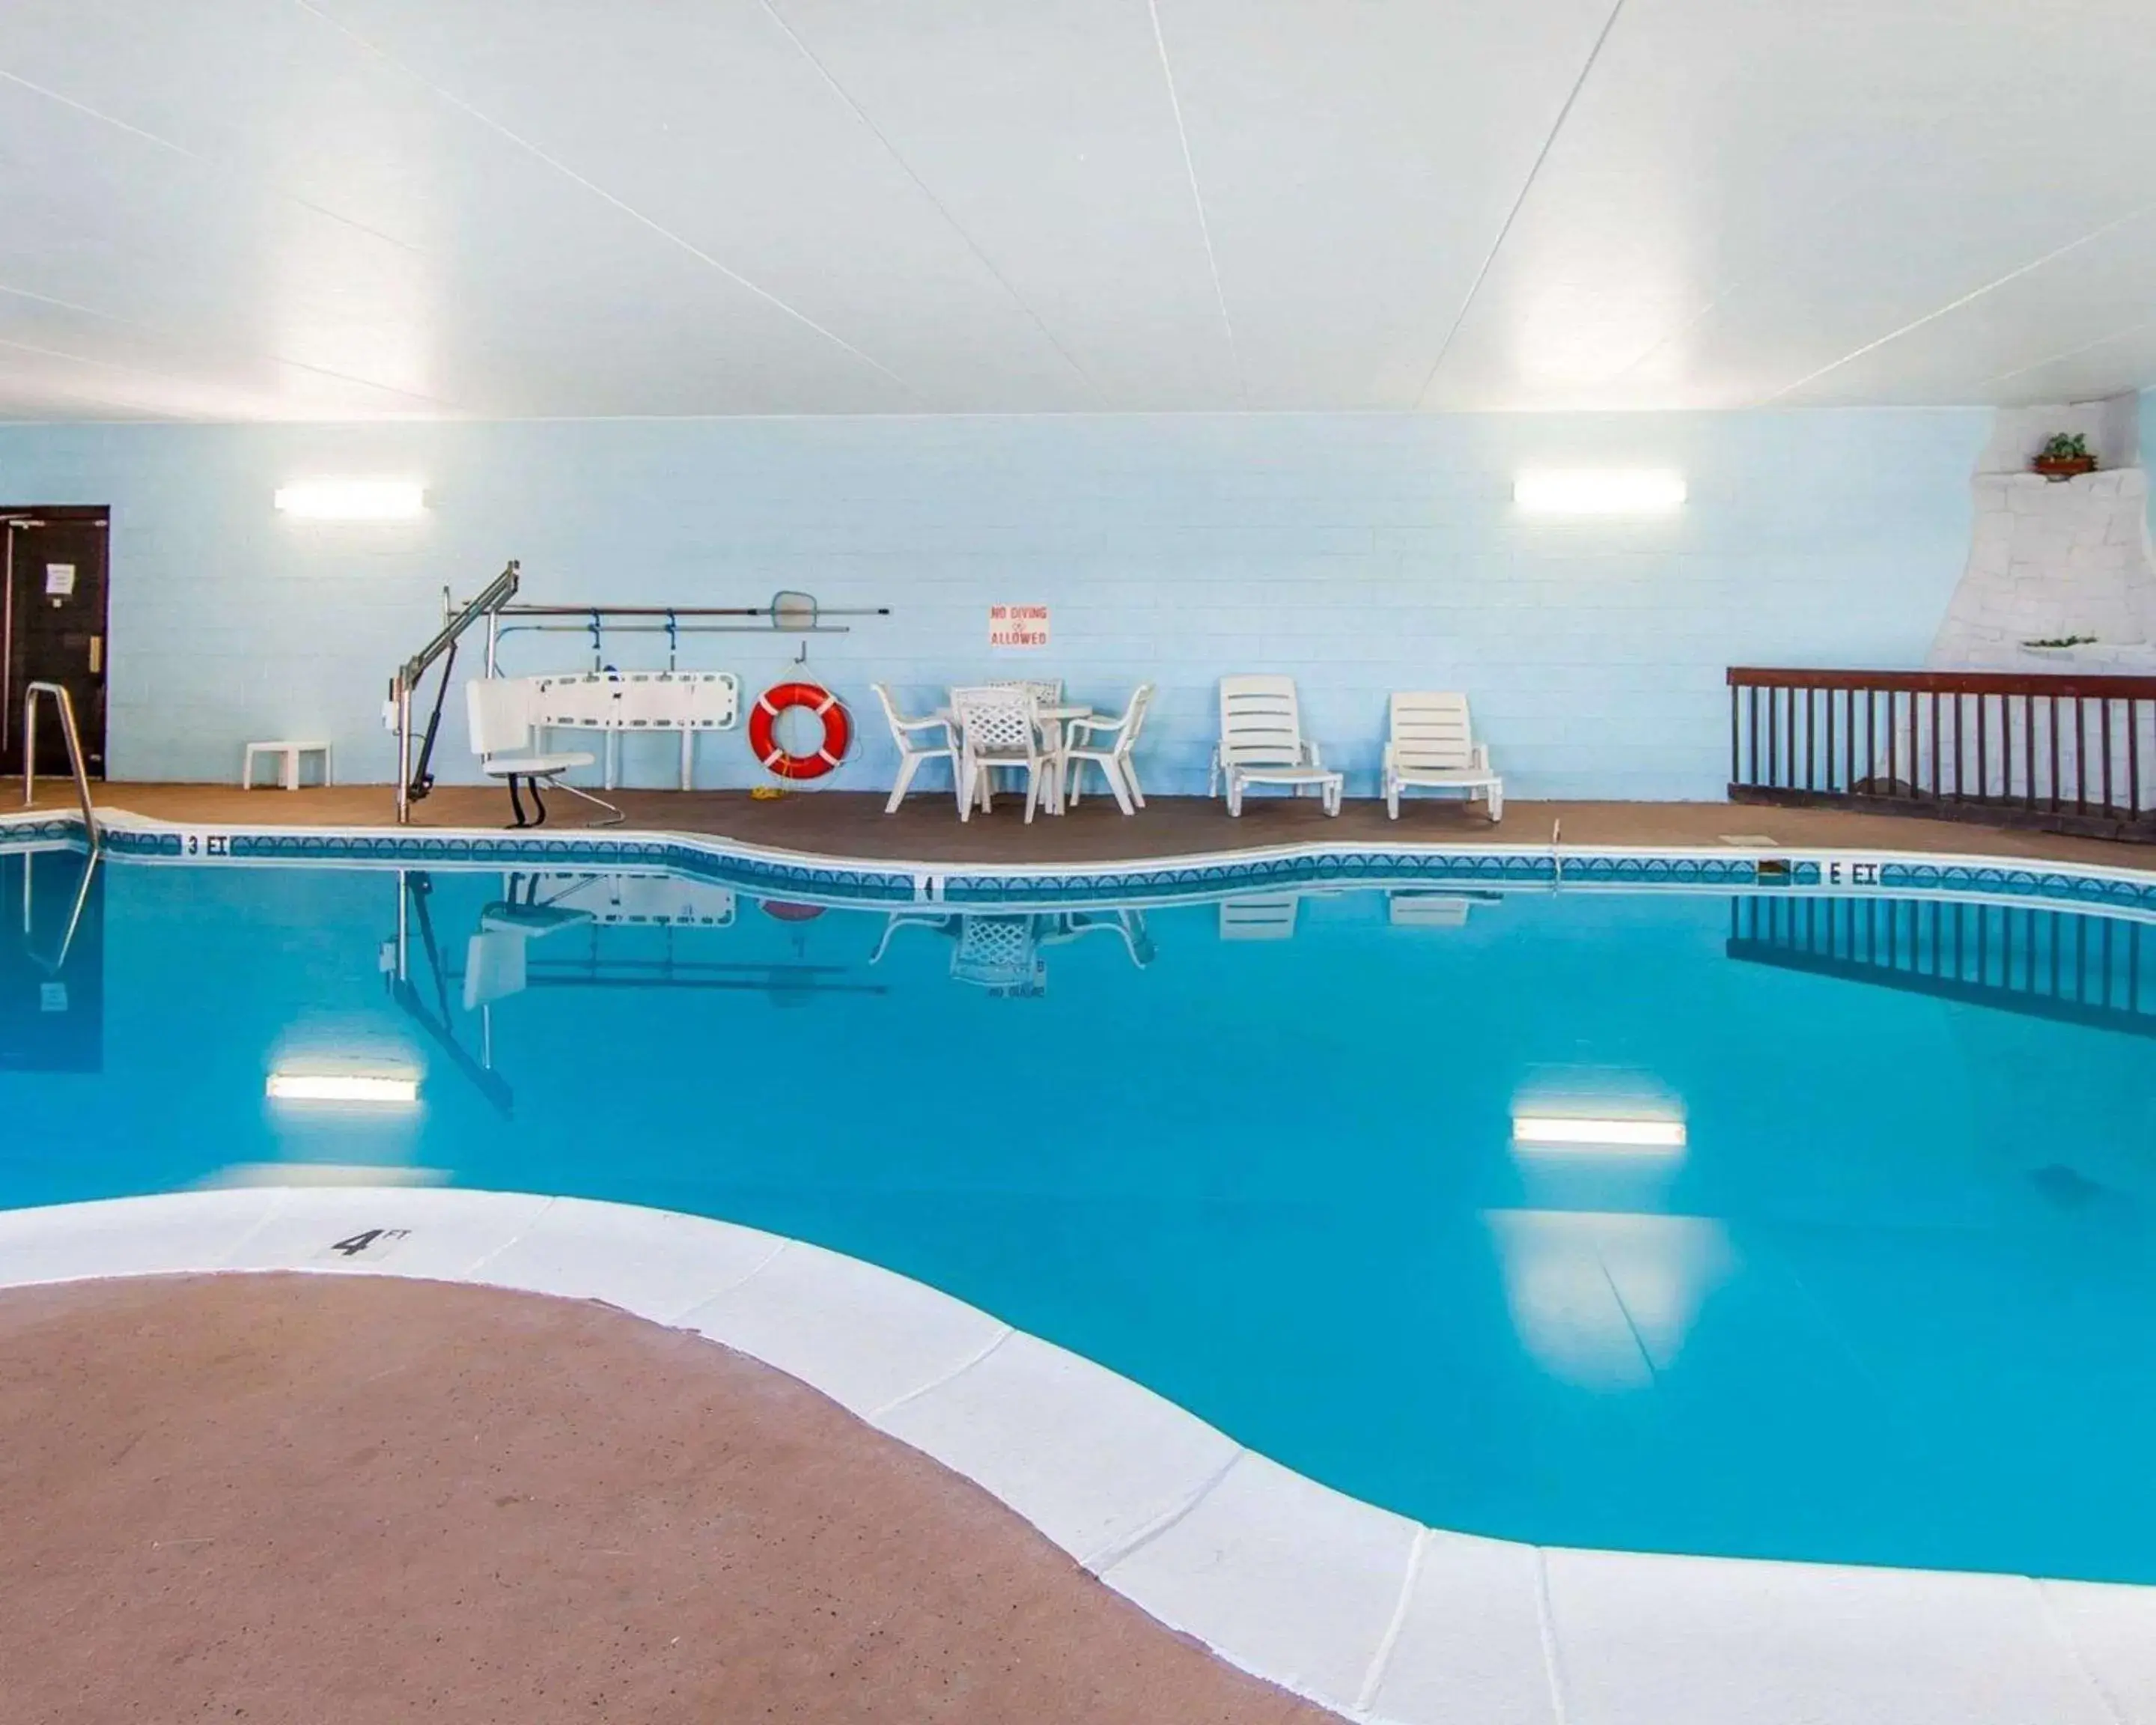 On site, Swimming Pool in Quality Inn Maysville